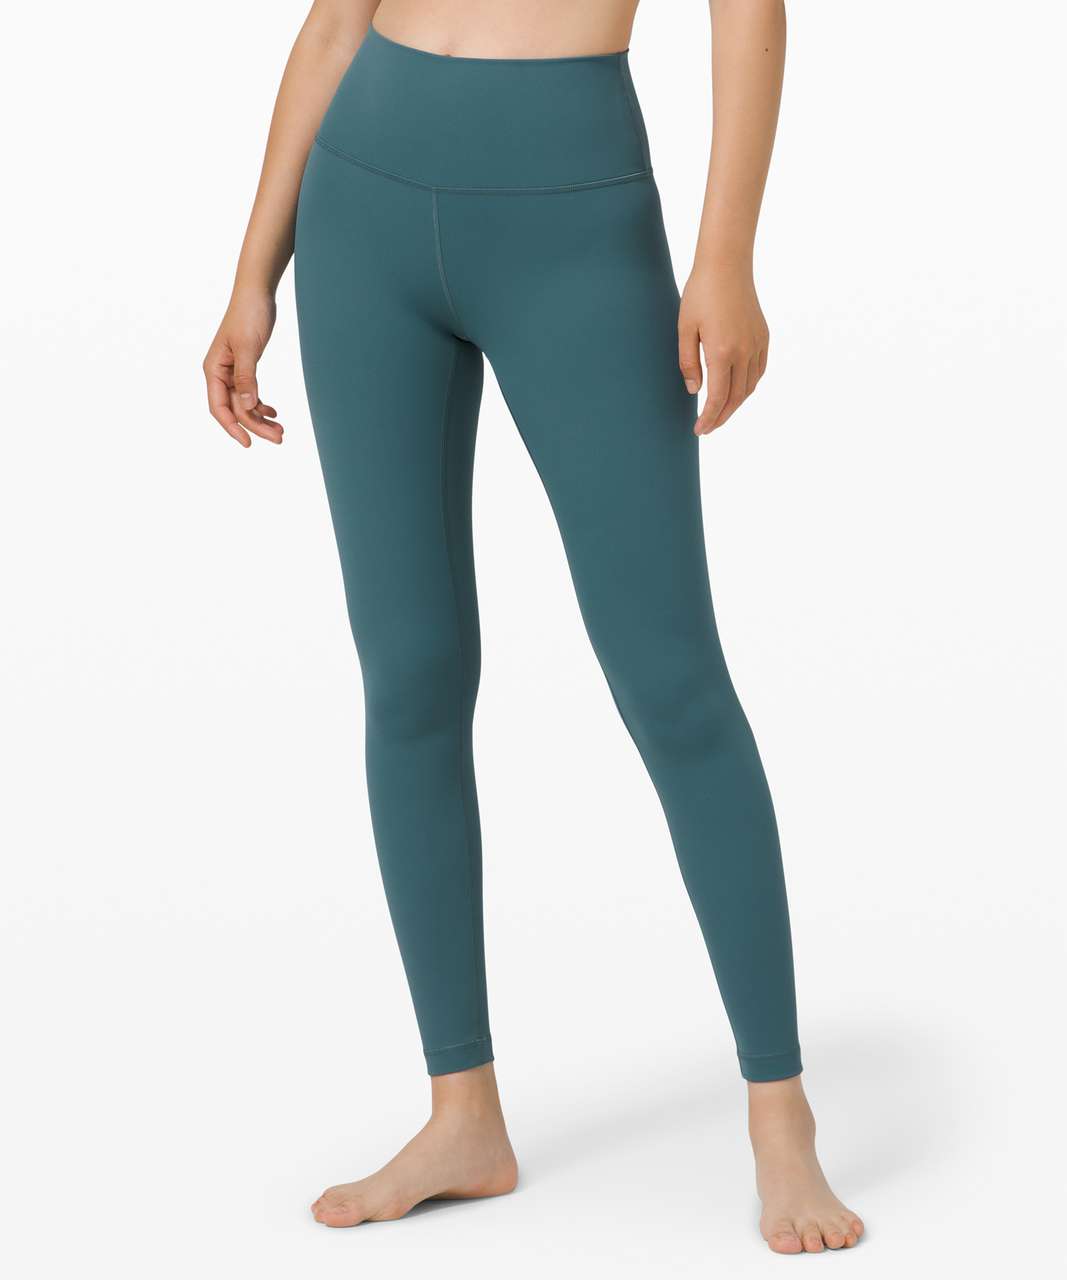 Lululemon Wunder Under High-Rise Tight 28 *Full-On Luxtreme - Brier Rose  (First Release) - lulu fanatics